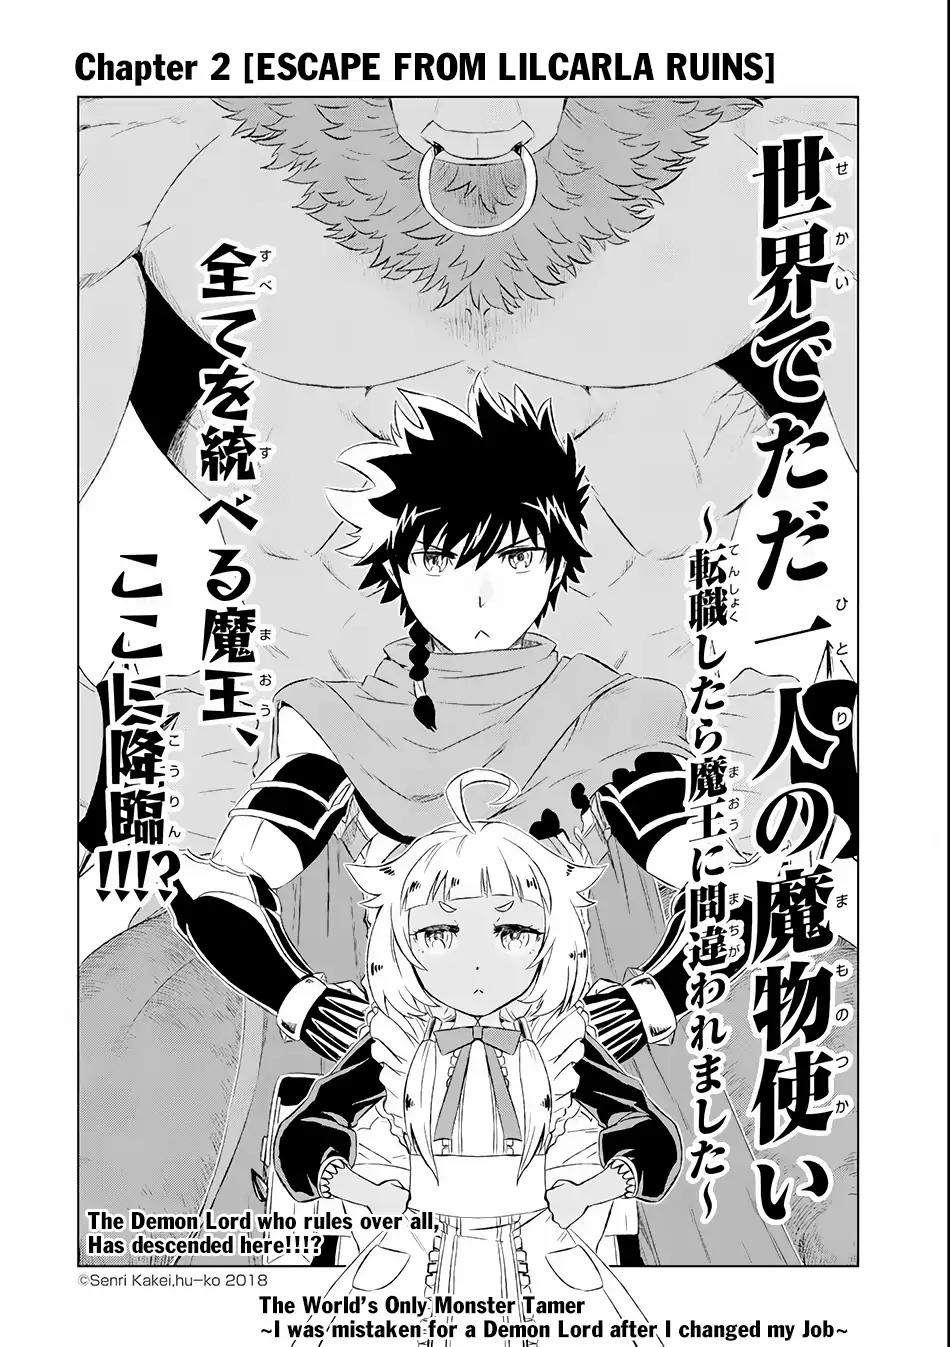 The Sole Monster Tamer in the World ~I Was Mistaken as the Demon King When I Changed My Job~ Chapter 2